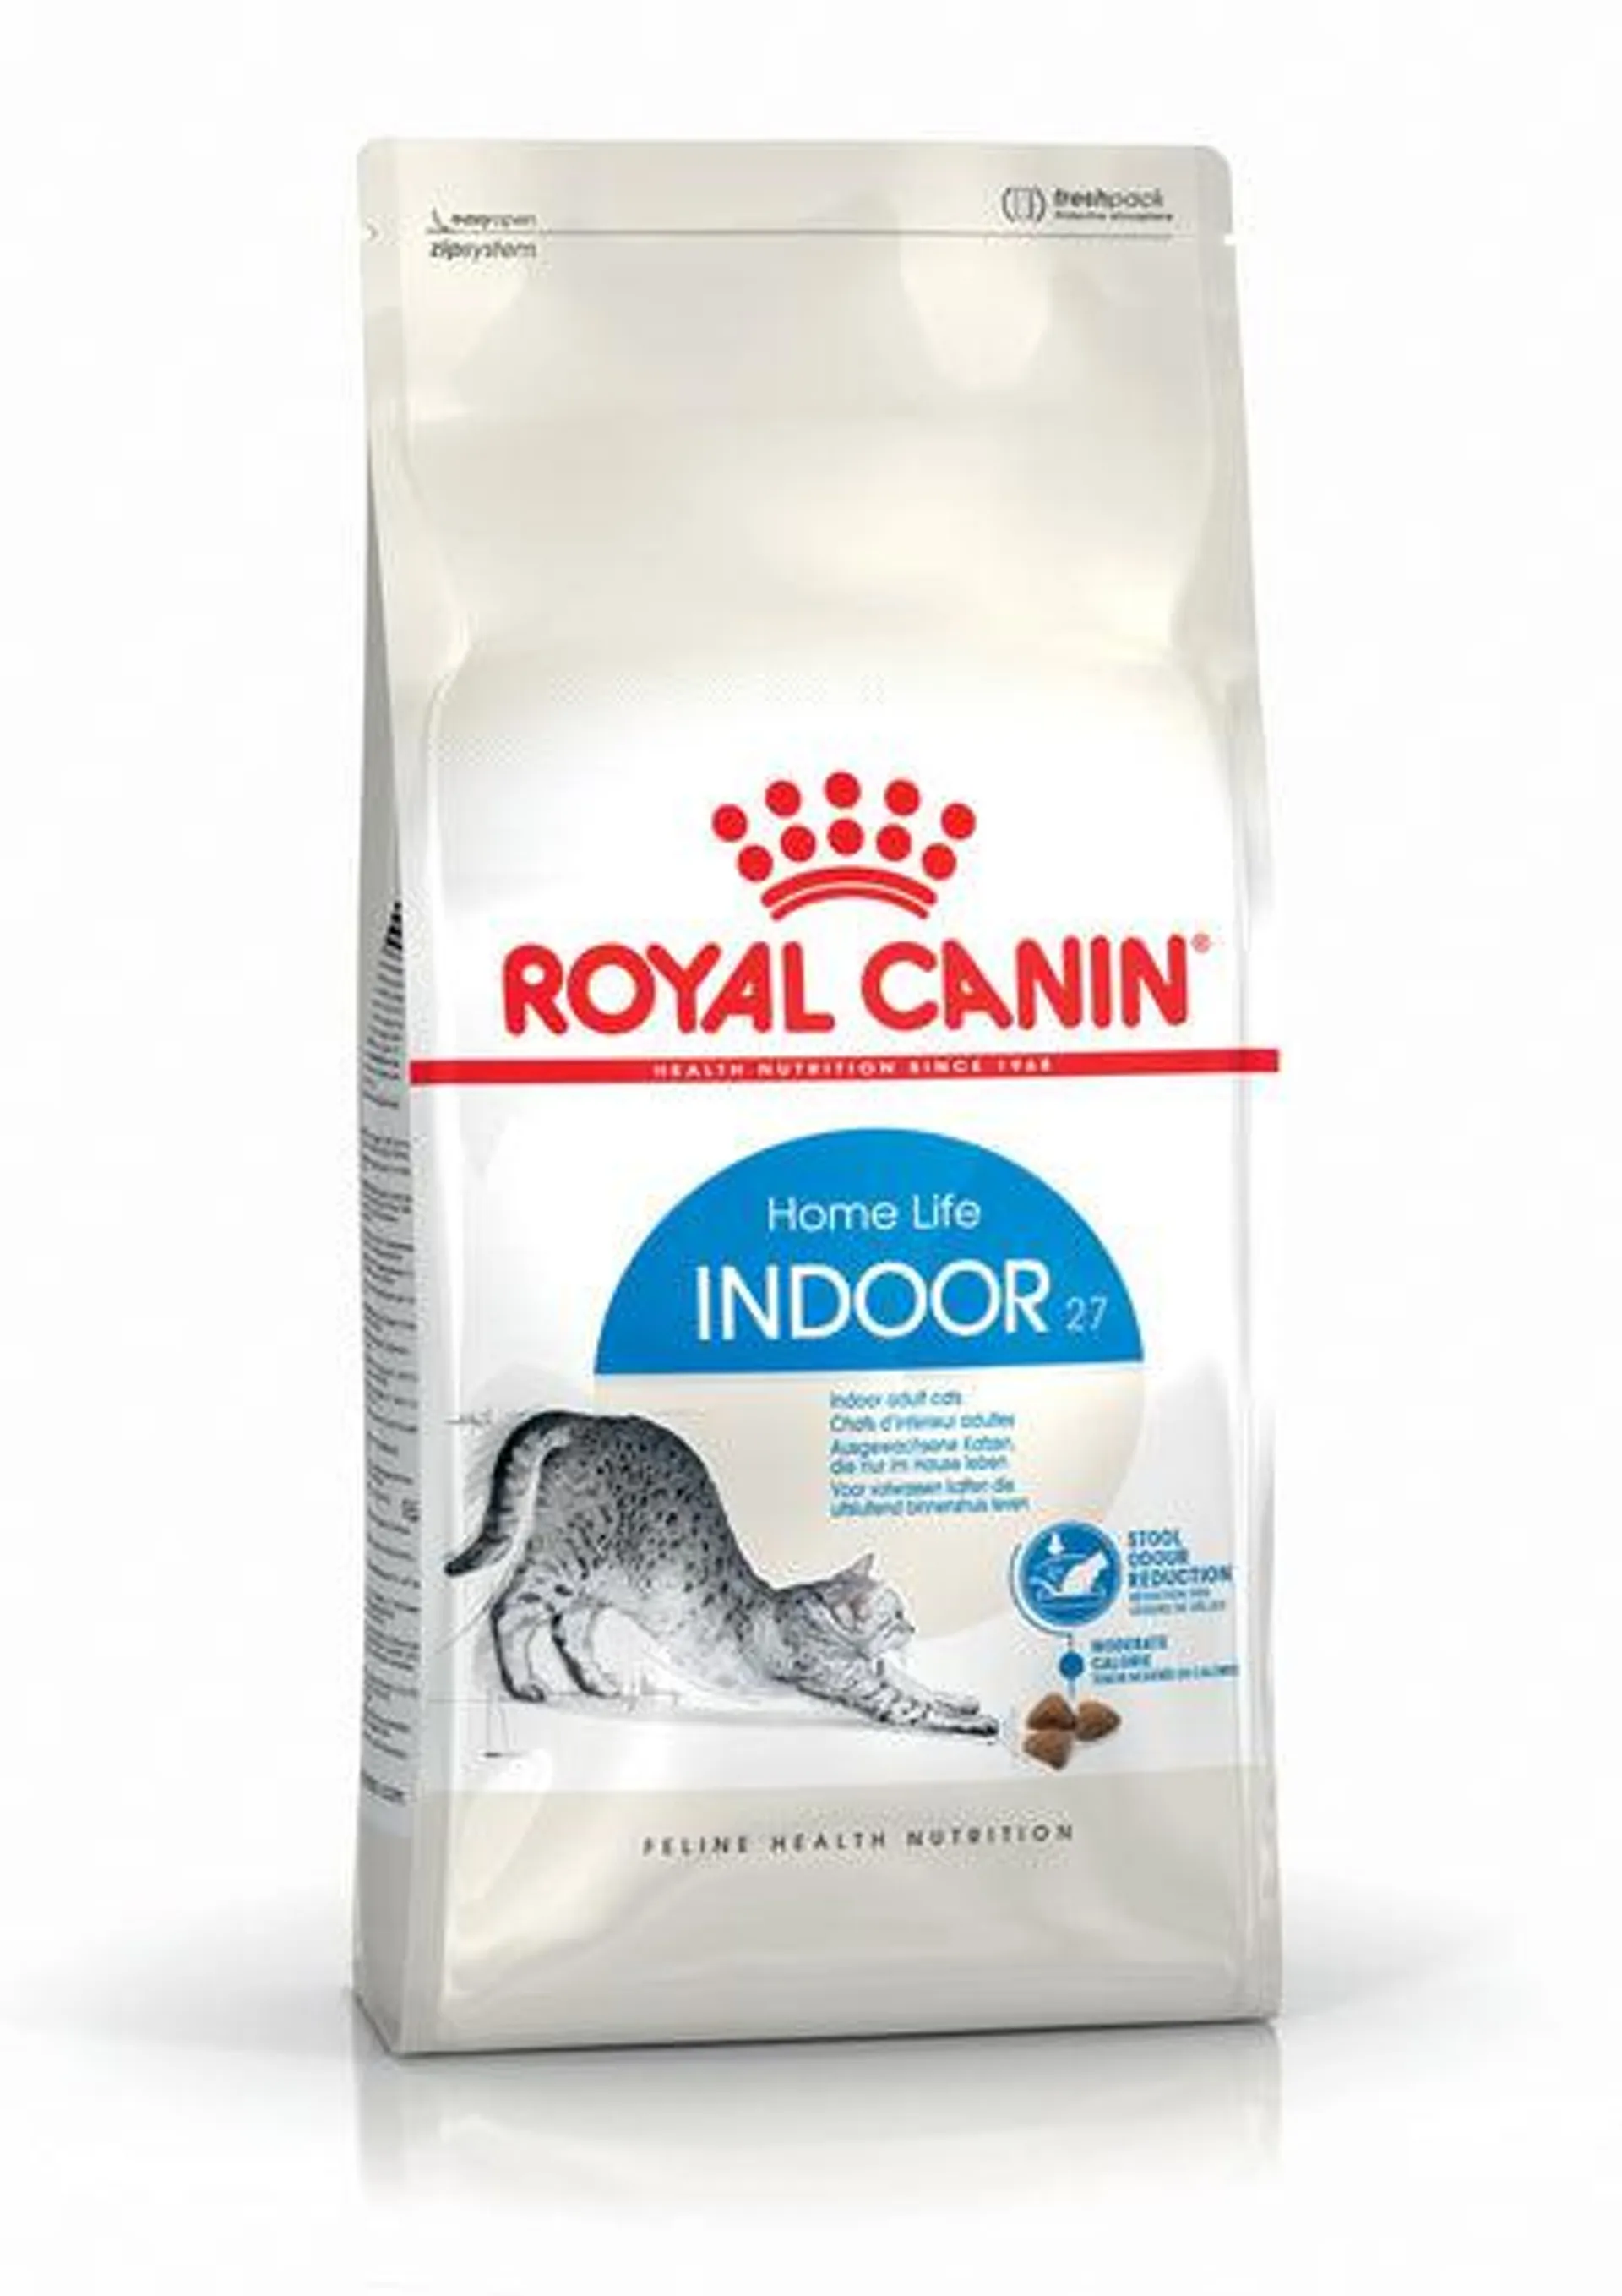 Royal Canin - Indoor Adult Cat Dry Food (4kg)